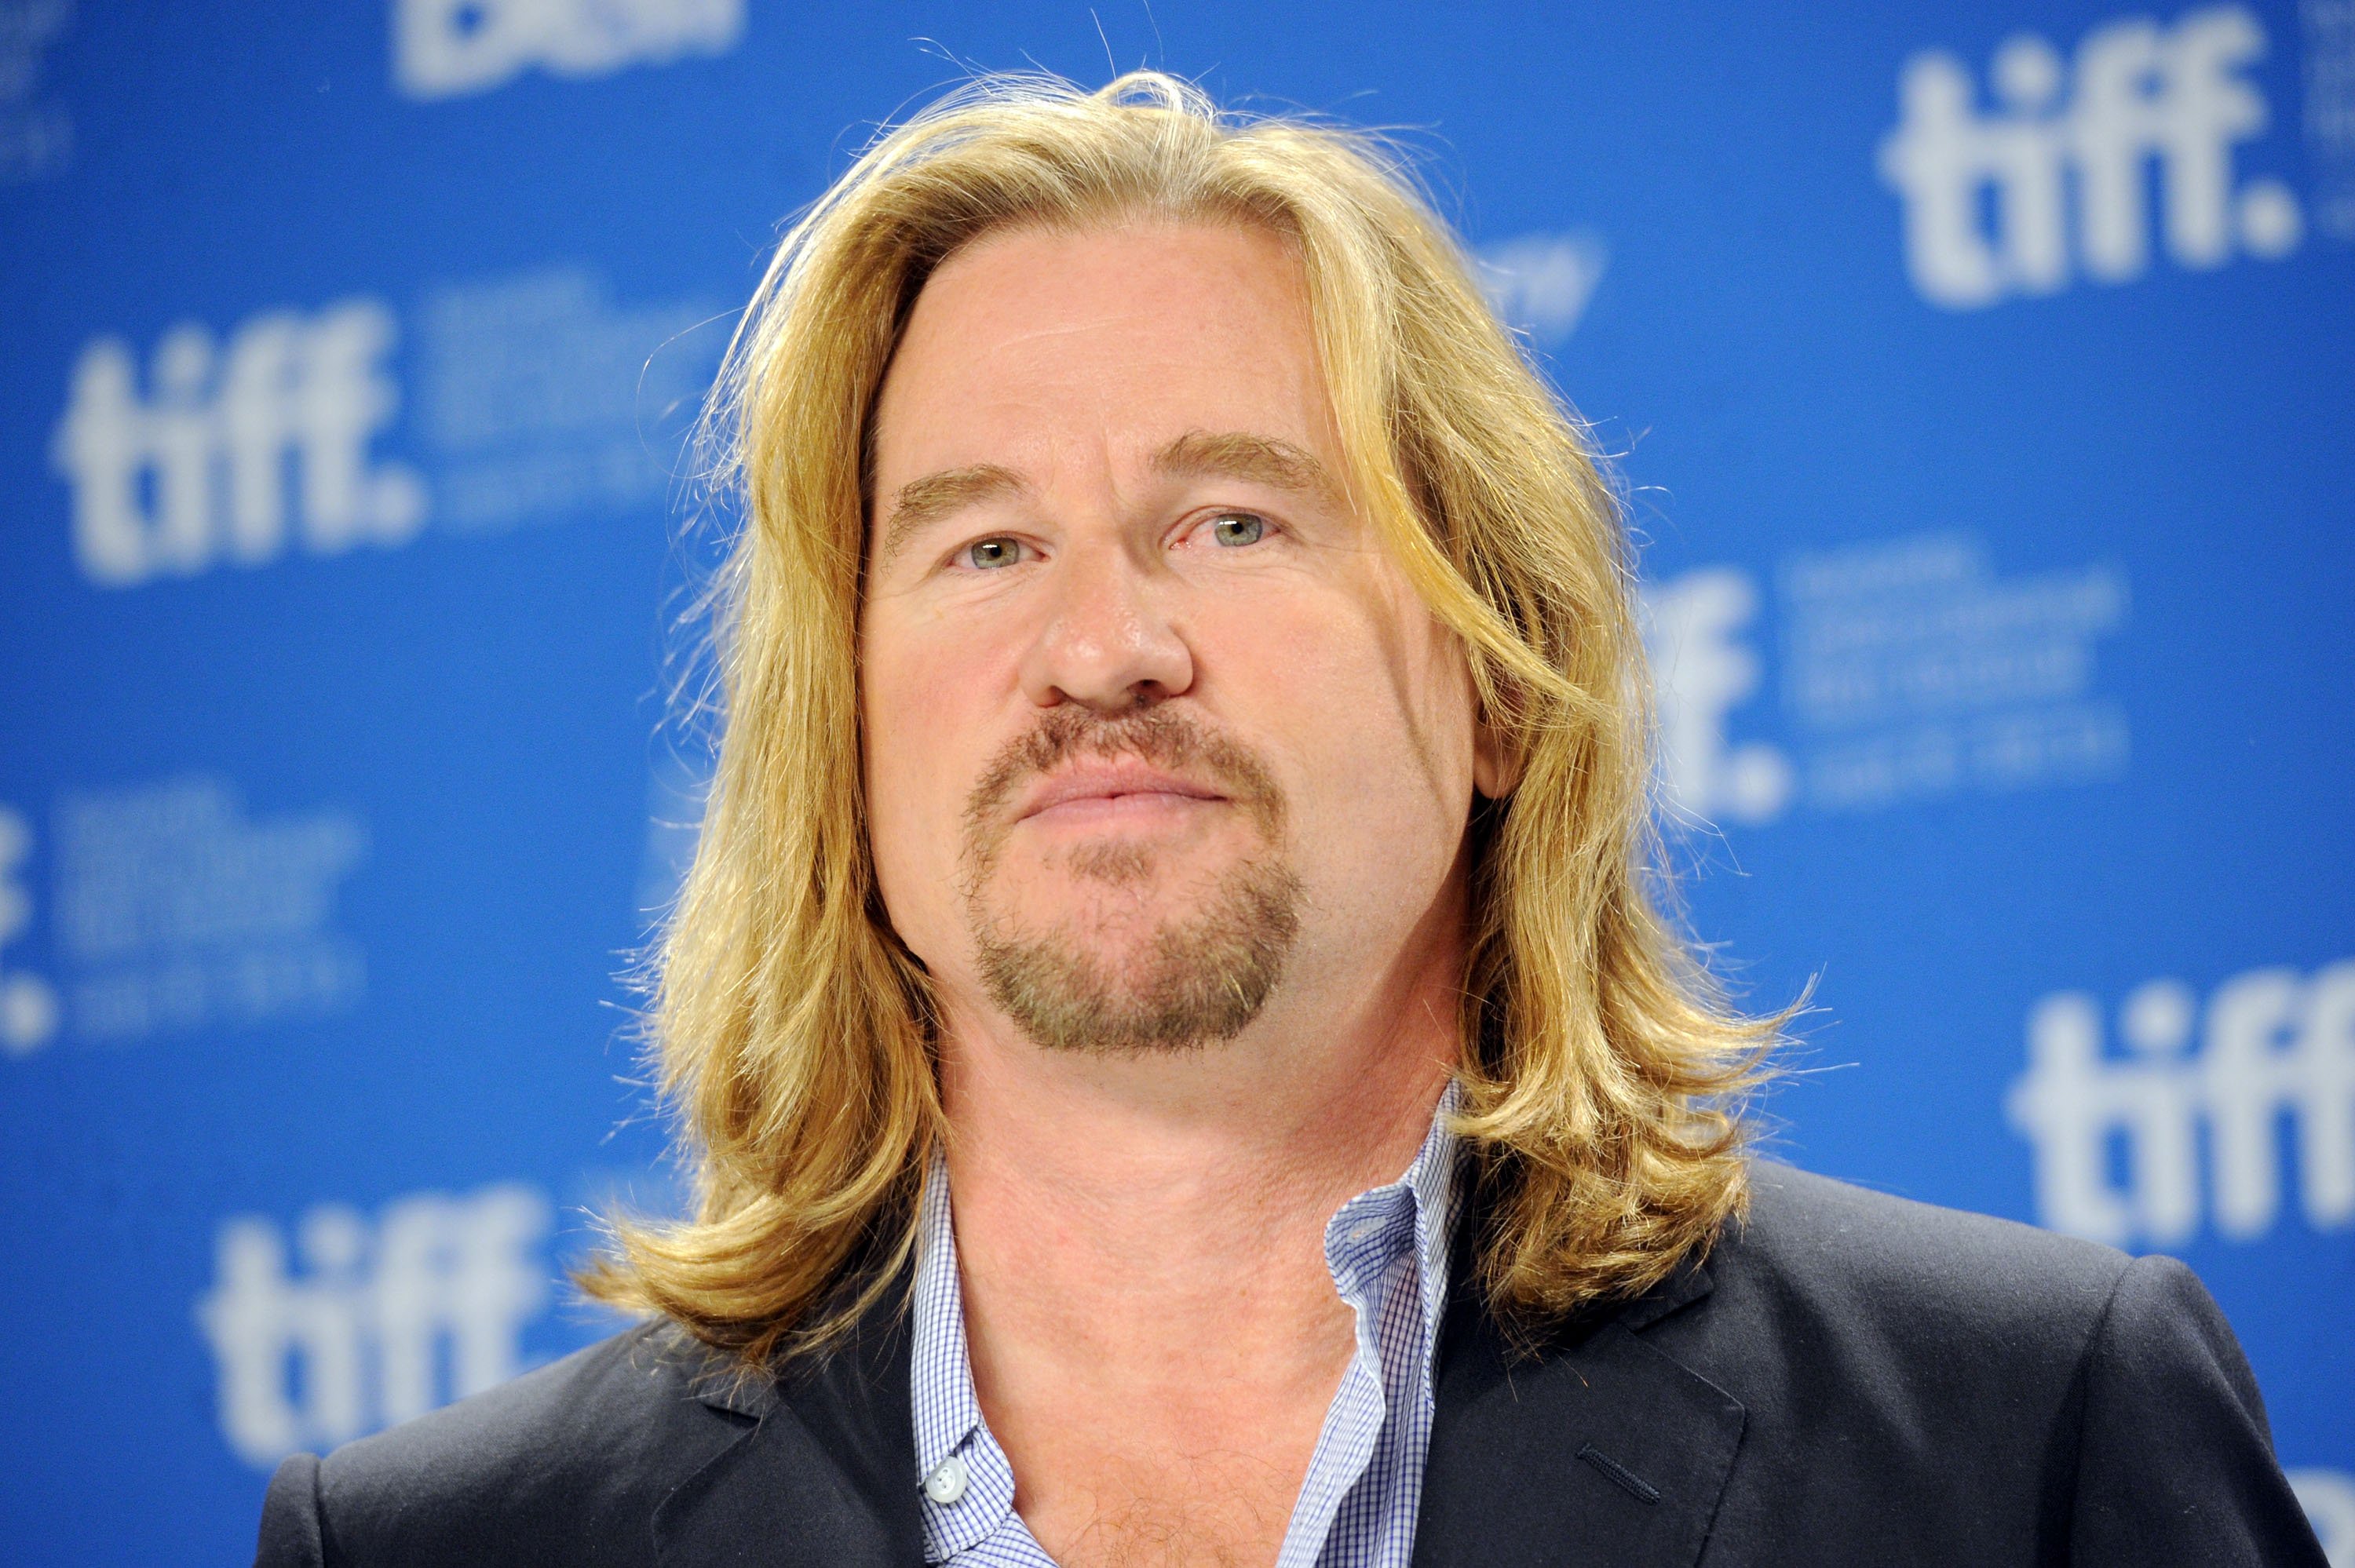 Val Kilmer speaks onstage at the 'Twixt' press conference during the 2011 Toronto International Film Festival at TIFF Bell Lightbox on September 12, 2011 in Toronto